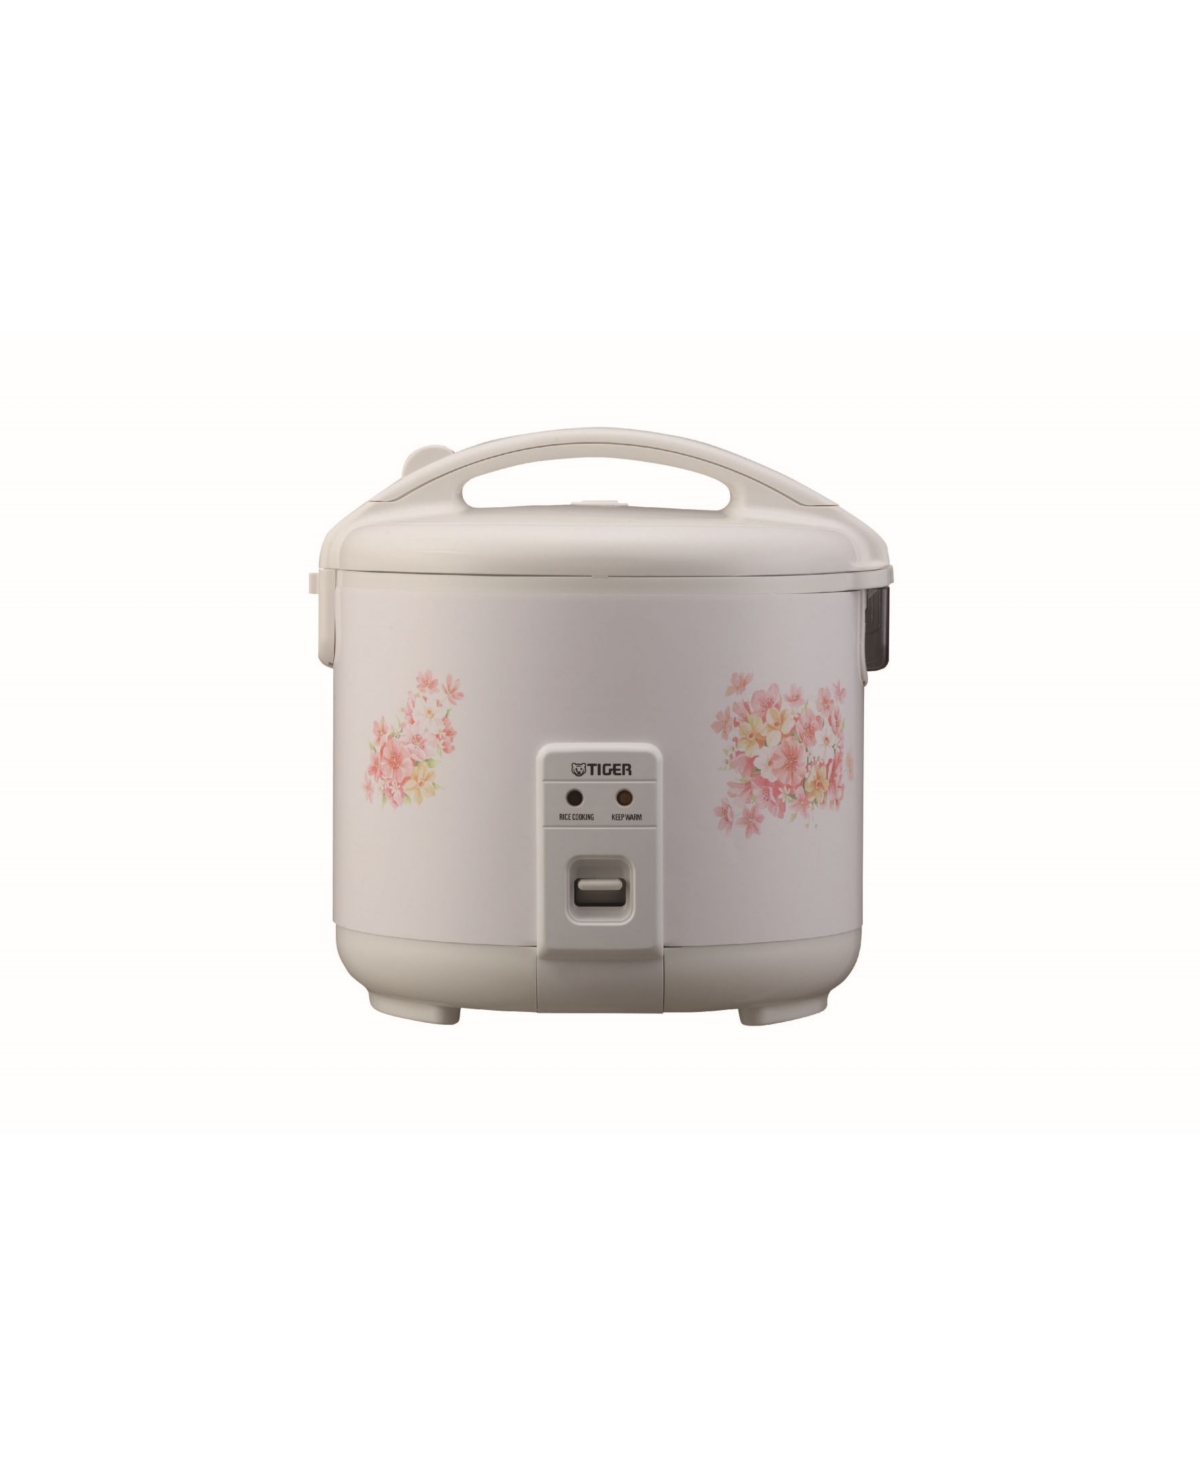 Tiger Jnp1800 Rice Cooker 10 Cup Electronic